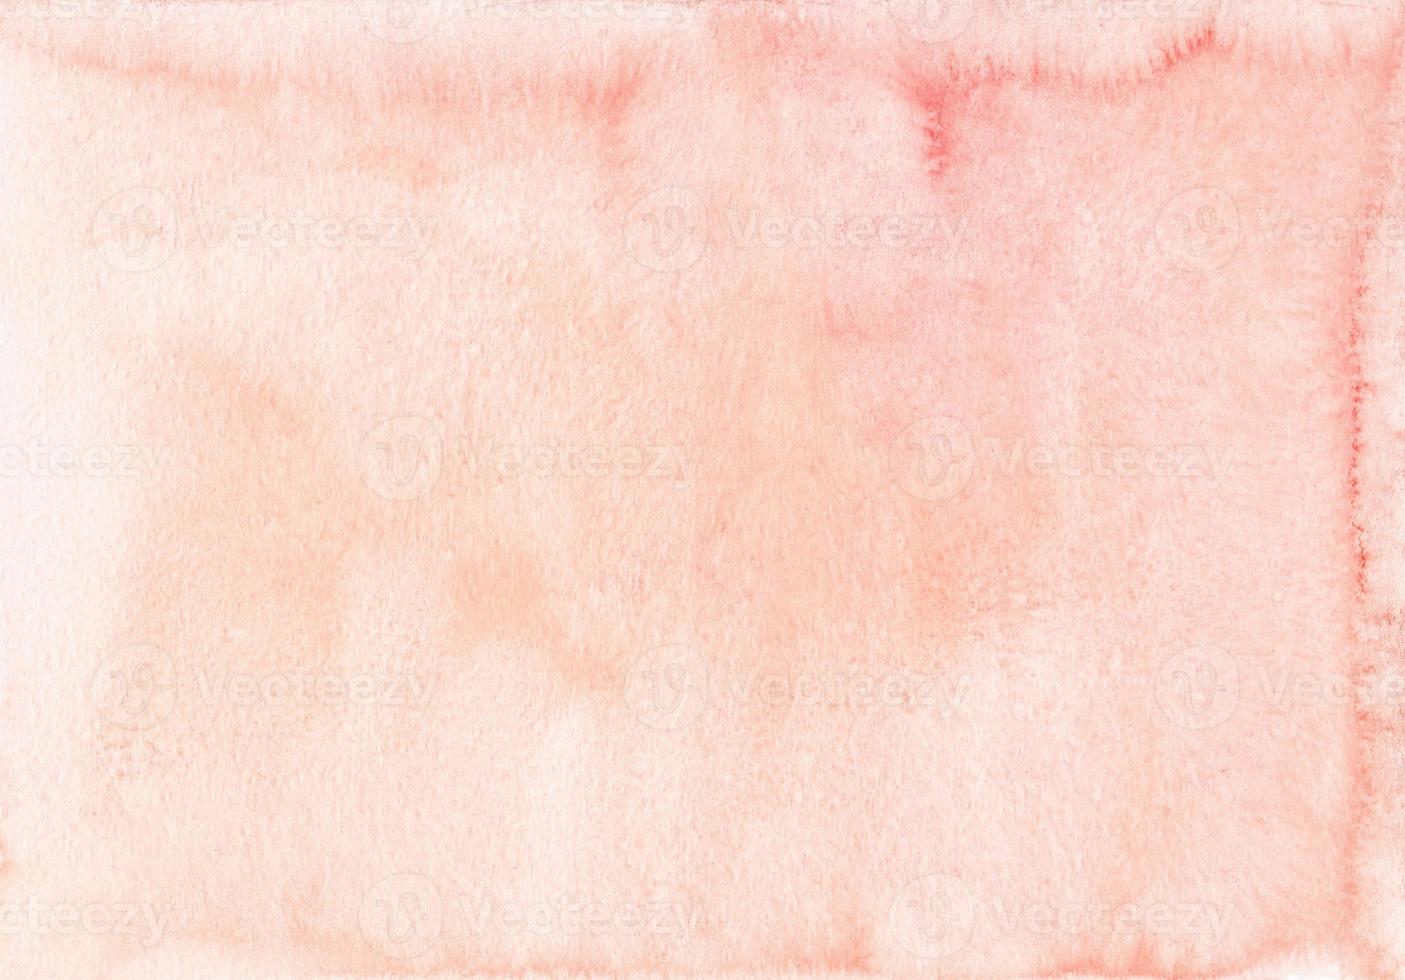 https://static.vecteezy.com/system/resources/previews/012/313/485/non_2x/watercolor-pastel-peach-color-background-texture-light-orange-stains-on-paper-hand-painted-photo.jpg